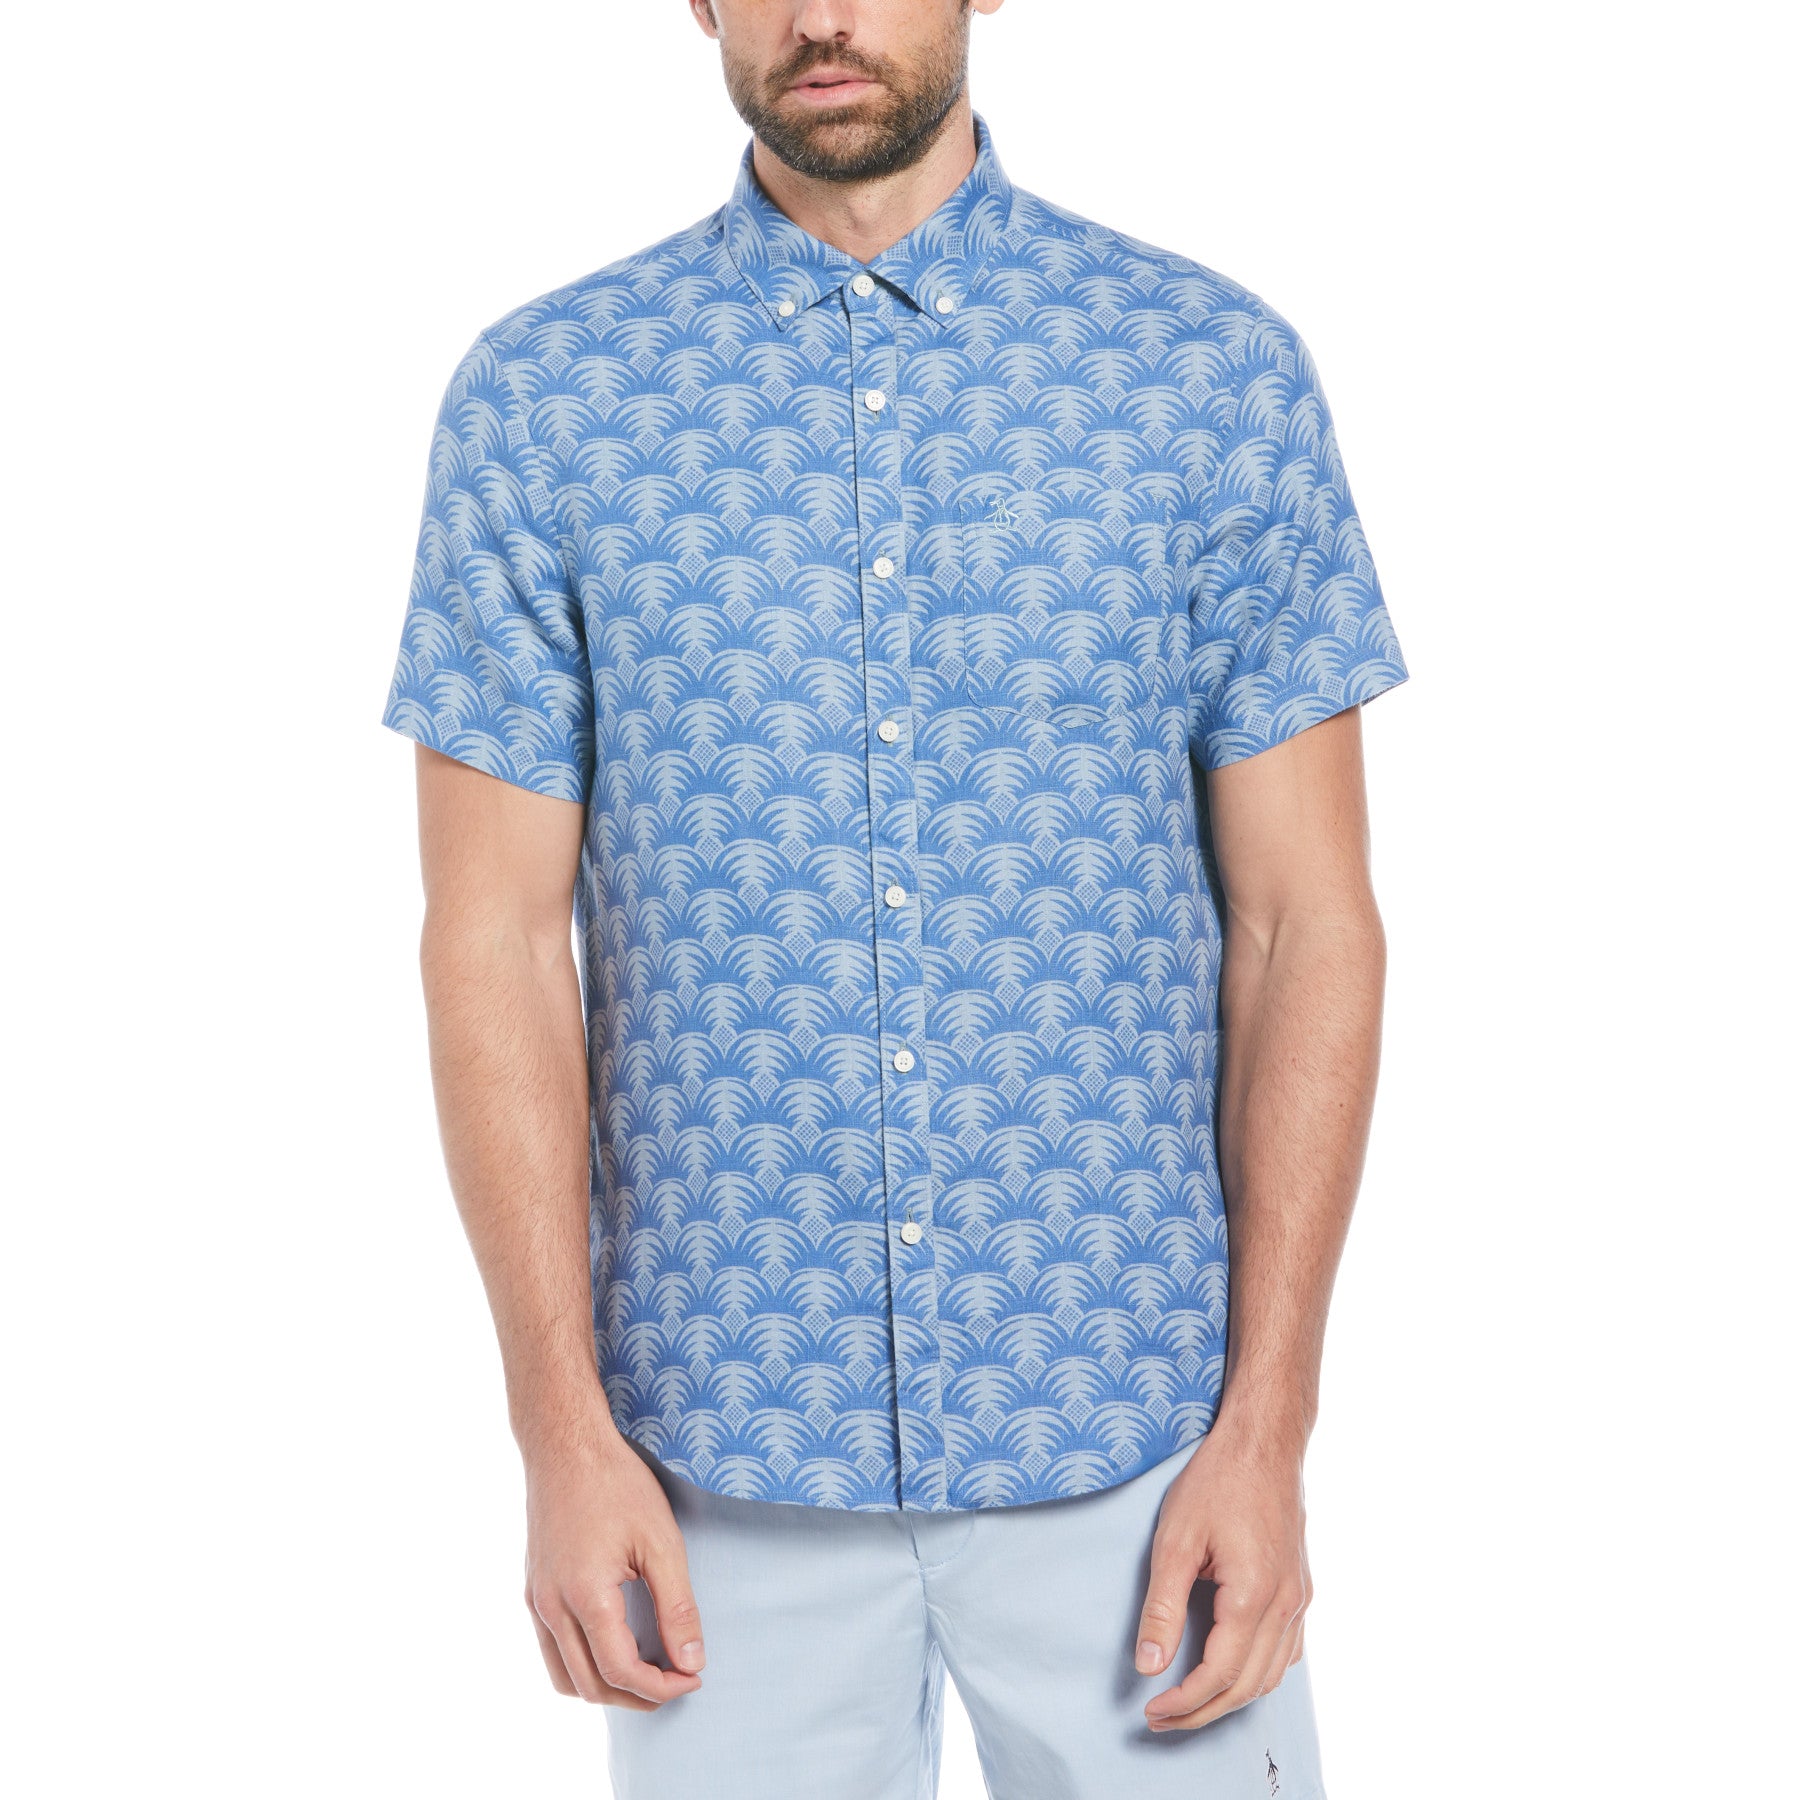 View Delave Linen Geometric Palm Print Short Sleeve ButtonDown Shirt In To information